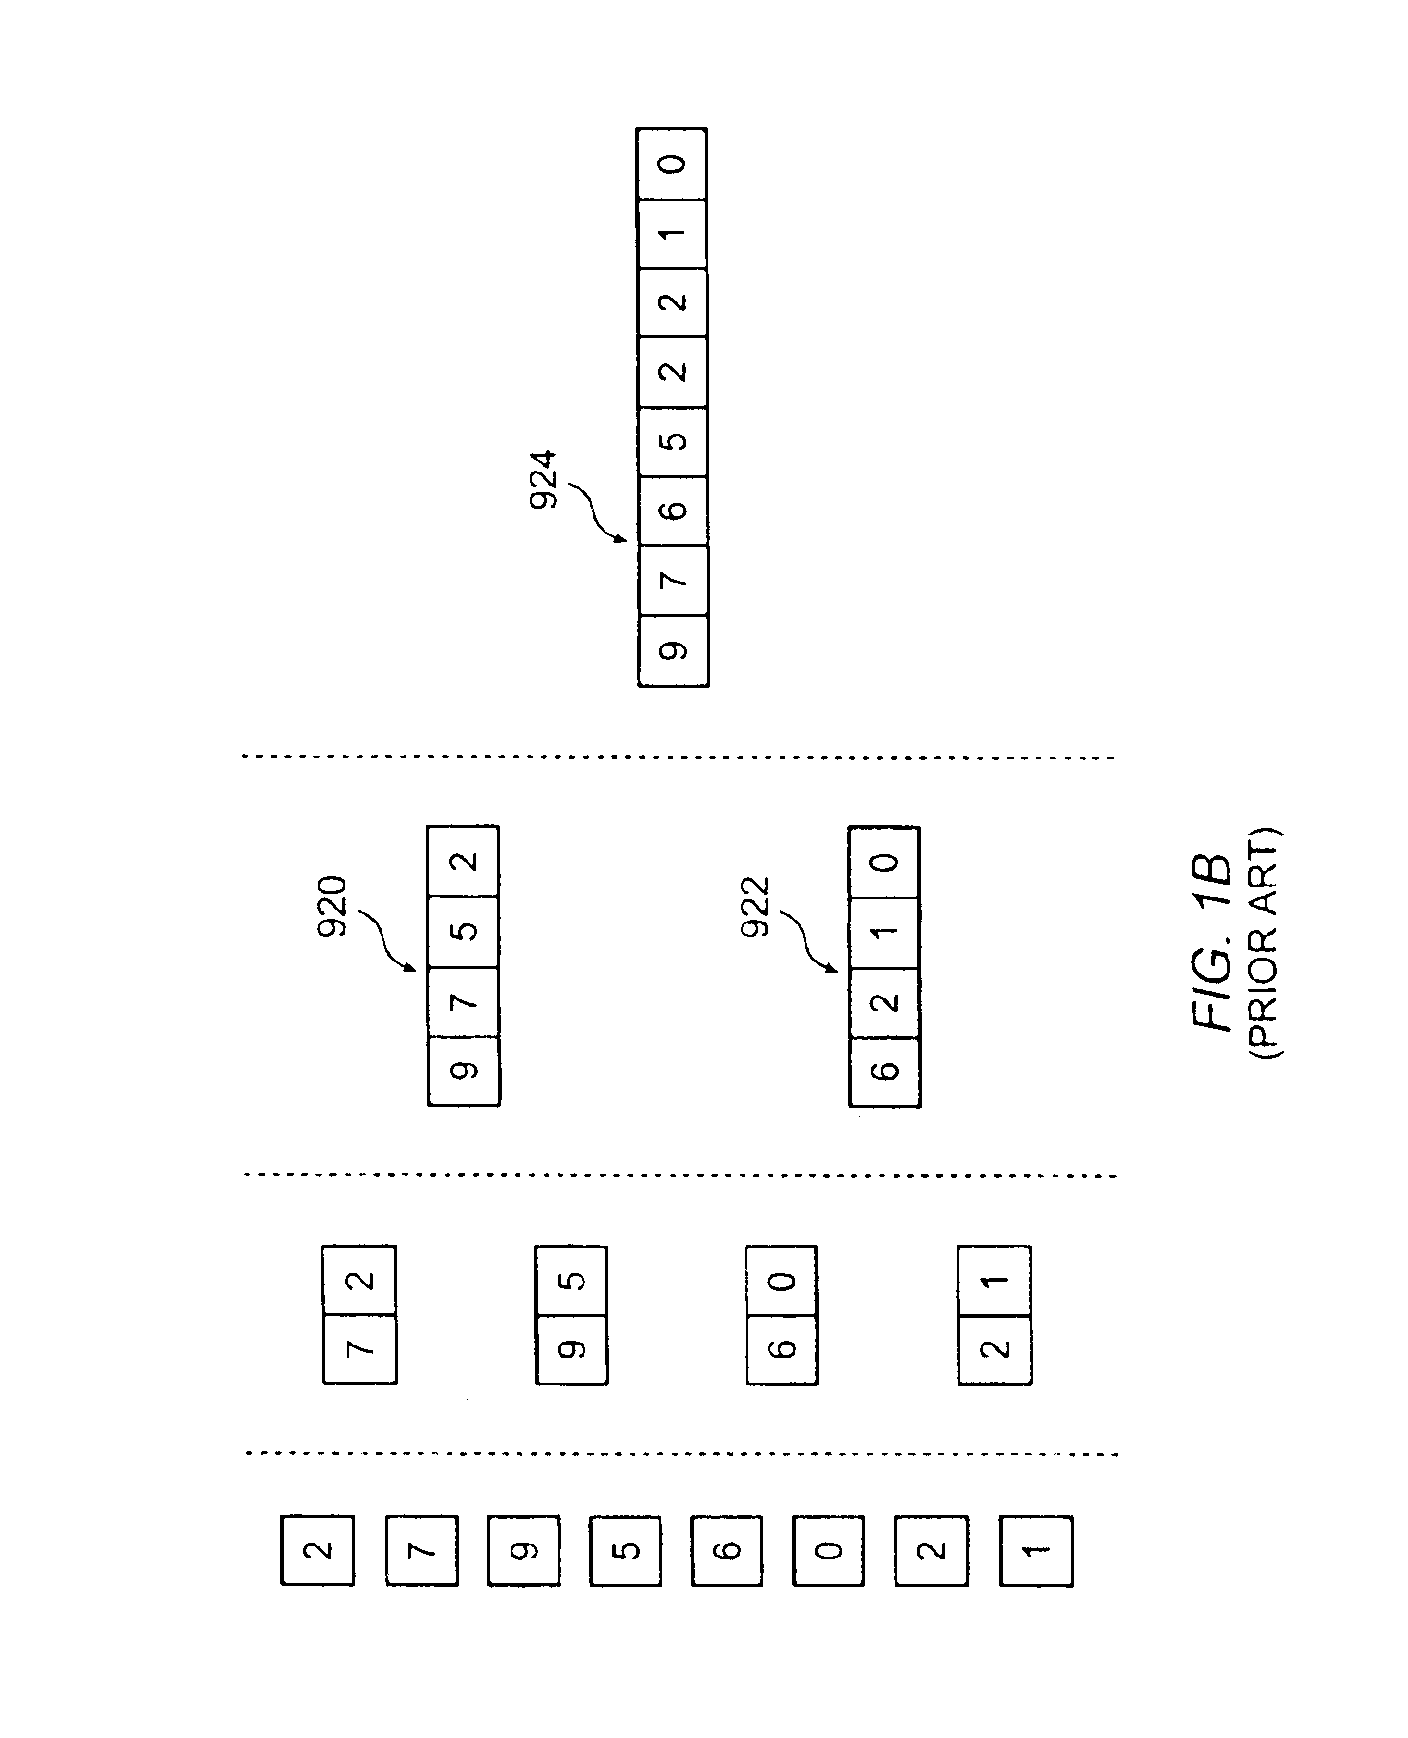 Communications interconnection network with distributed resequencing